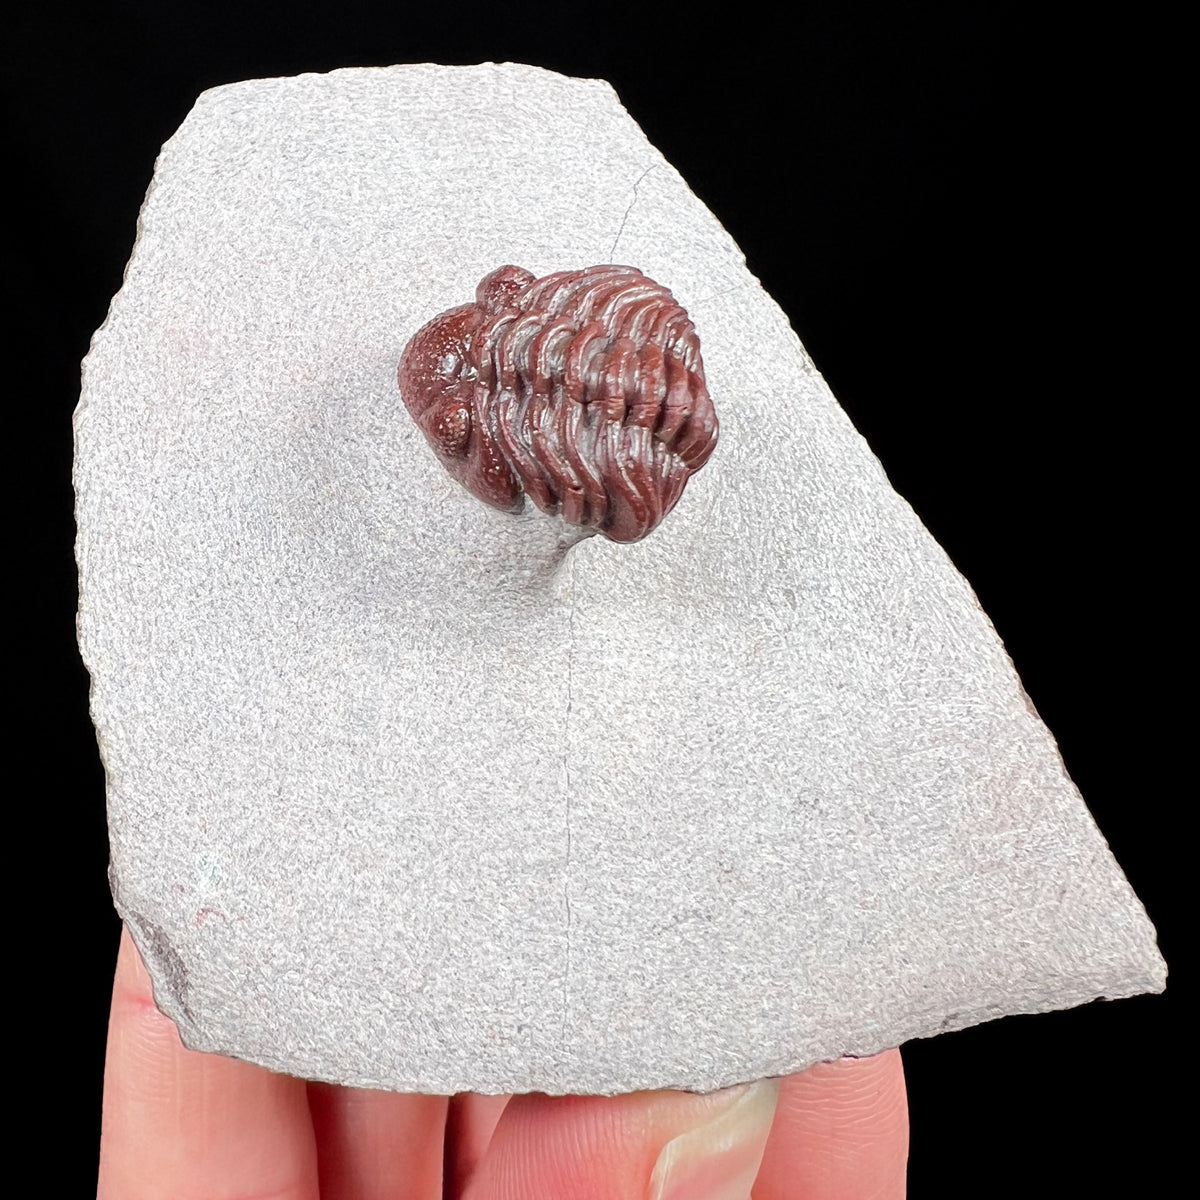 Austerops Trilobite from Devonian fossil beds Morocco